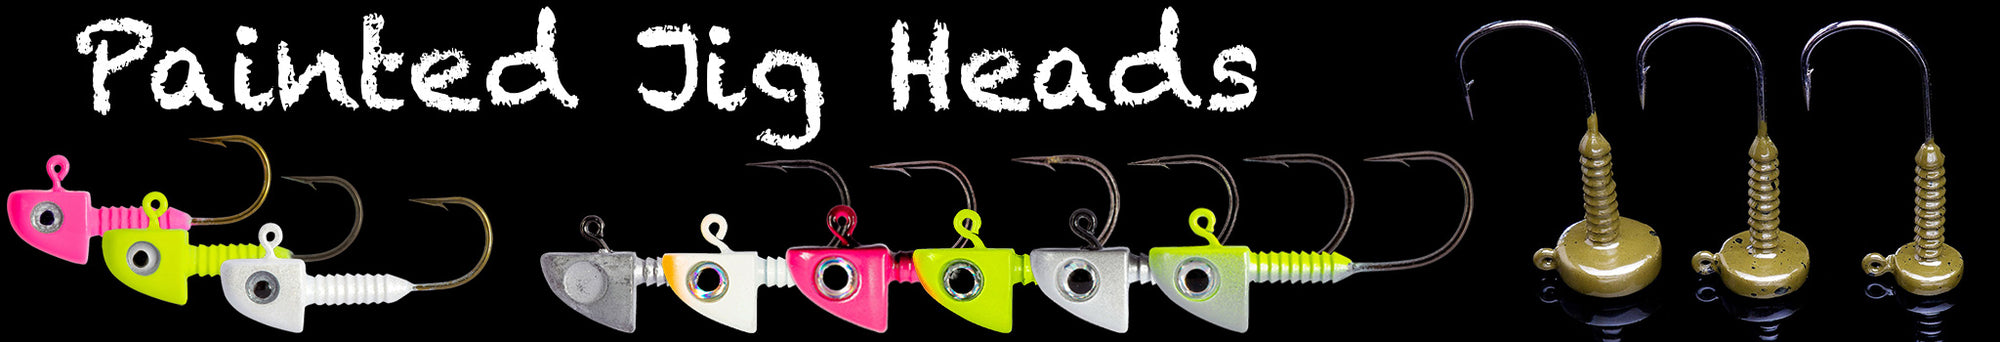 Painted Jig Heads